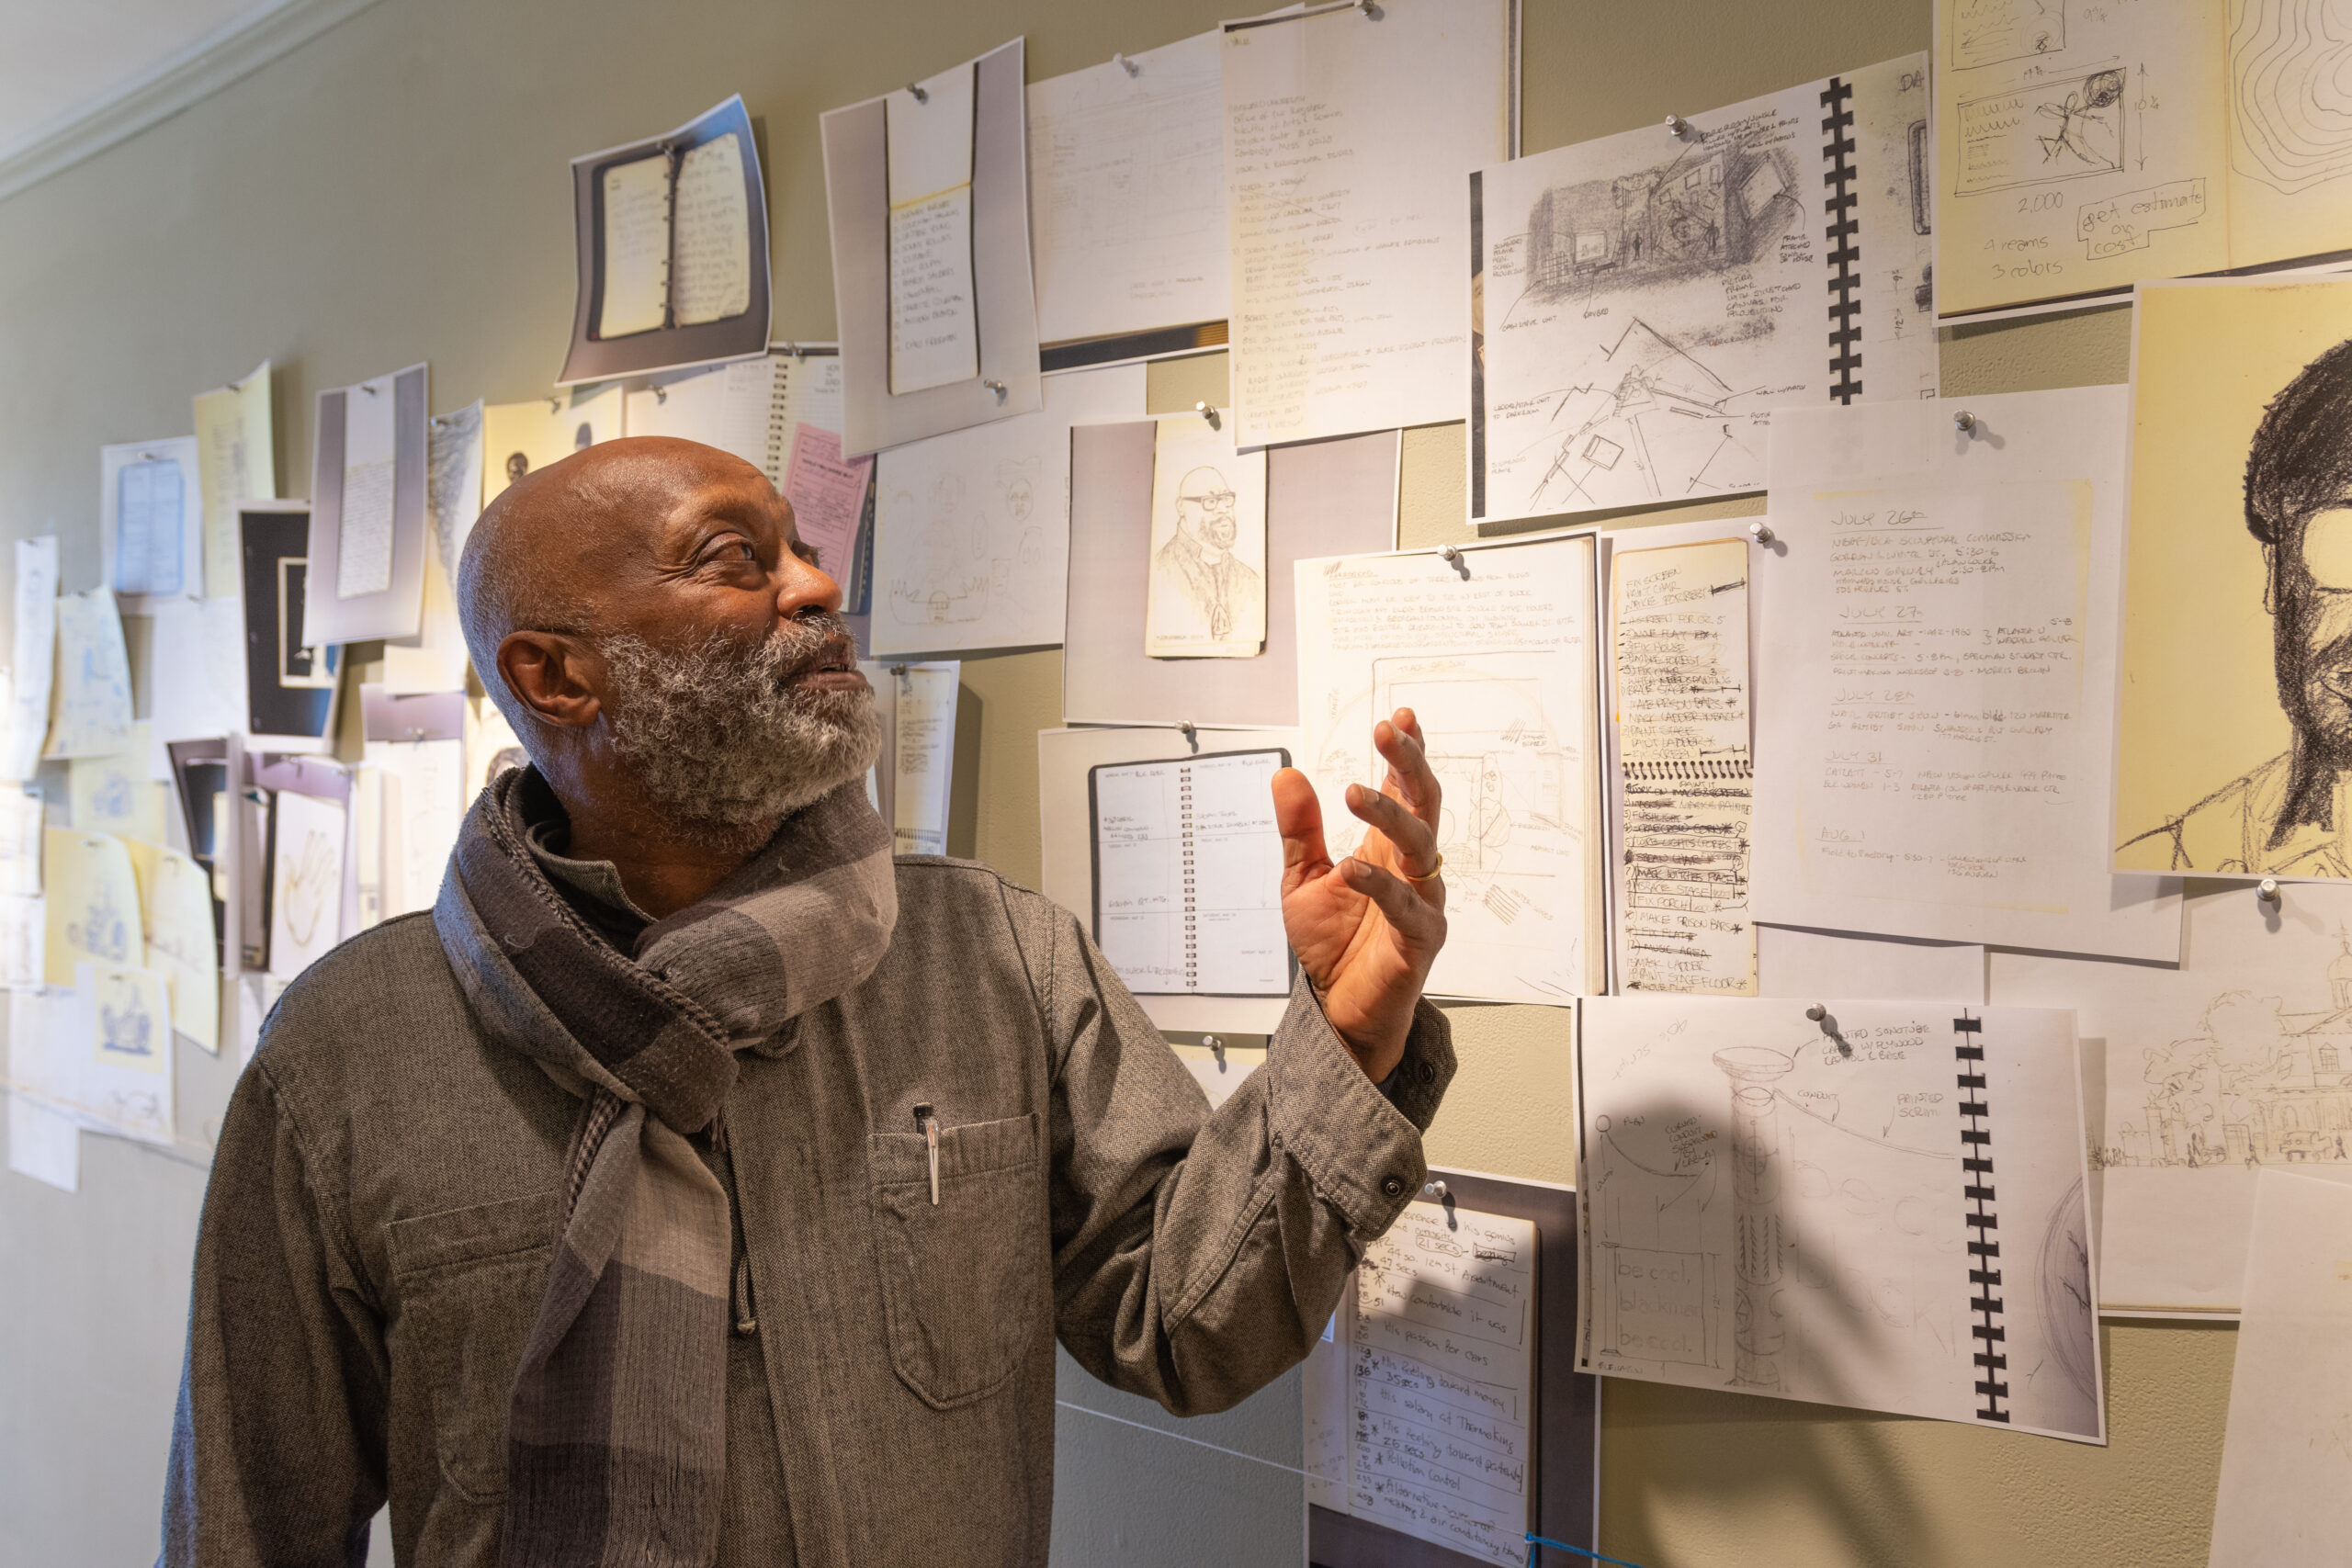 Person with dark skin, gray beard, gray shirt and scarf gestures with open hand while looking up at beige wall covered with many small drawings.